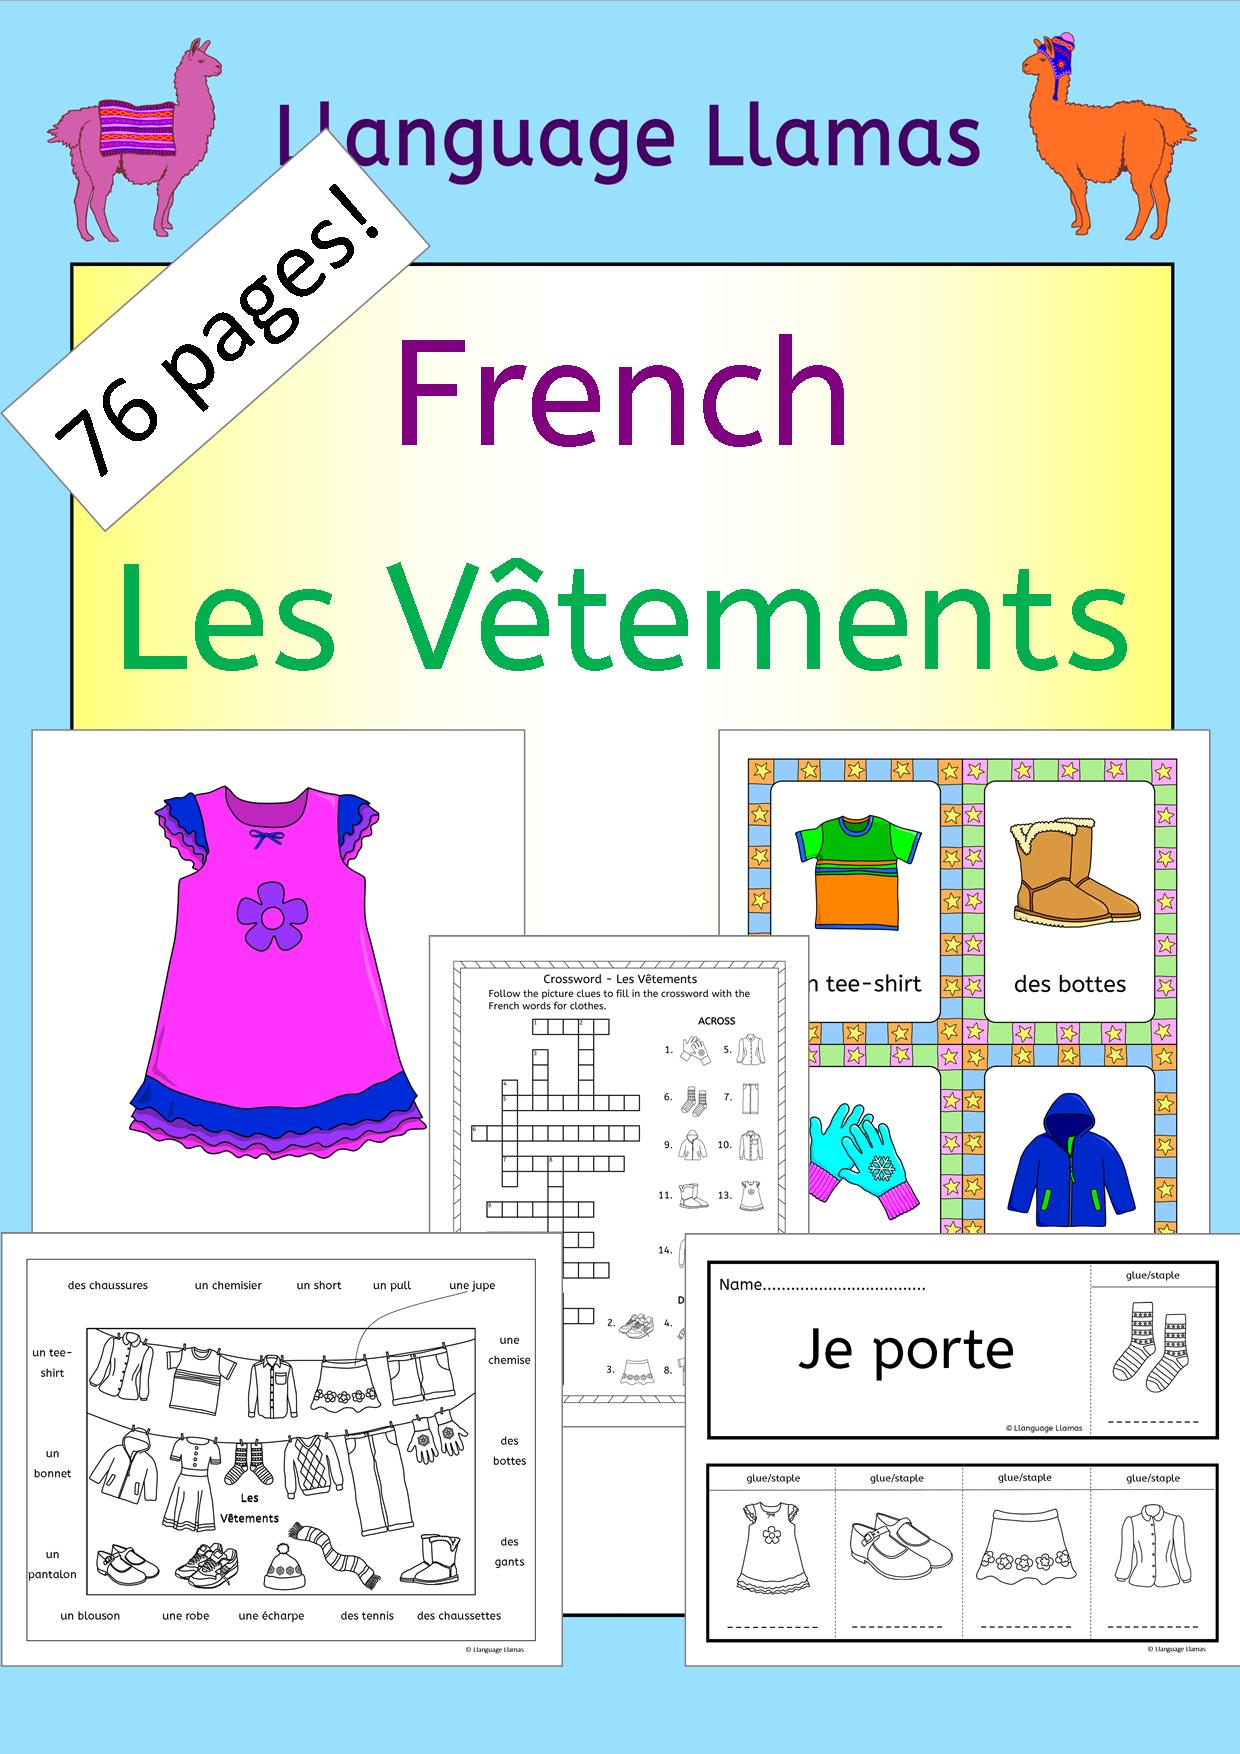 French Clothing - Les Vetements